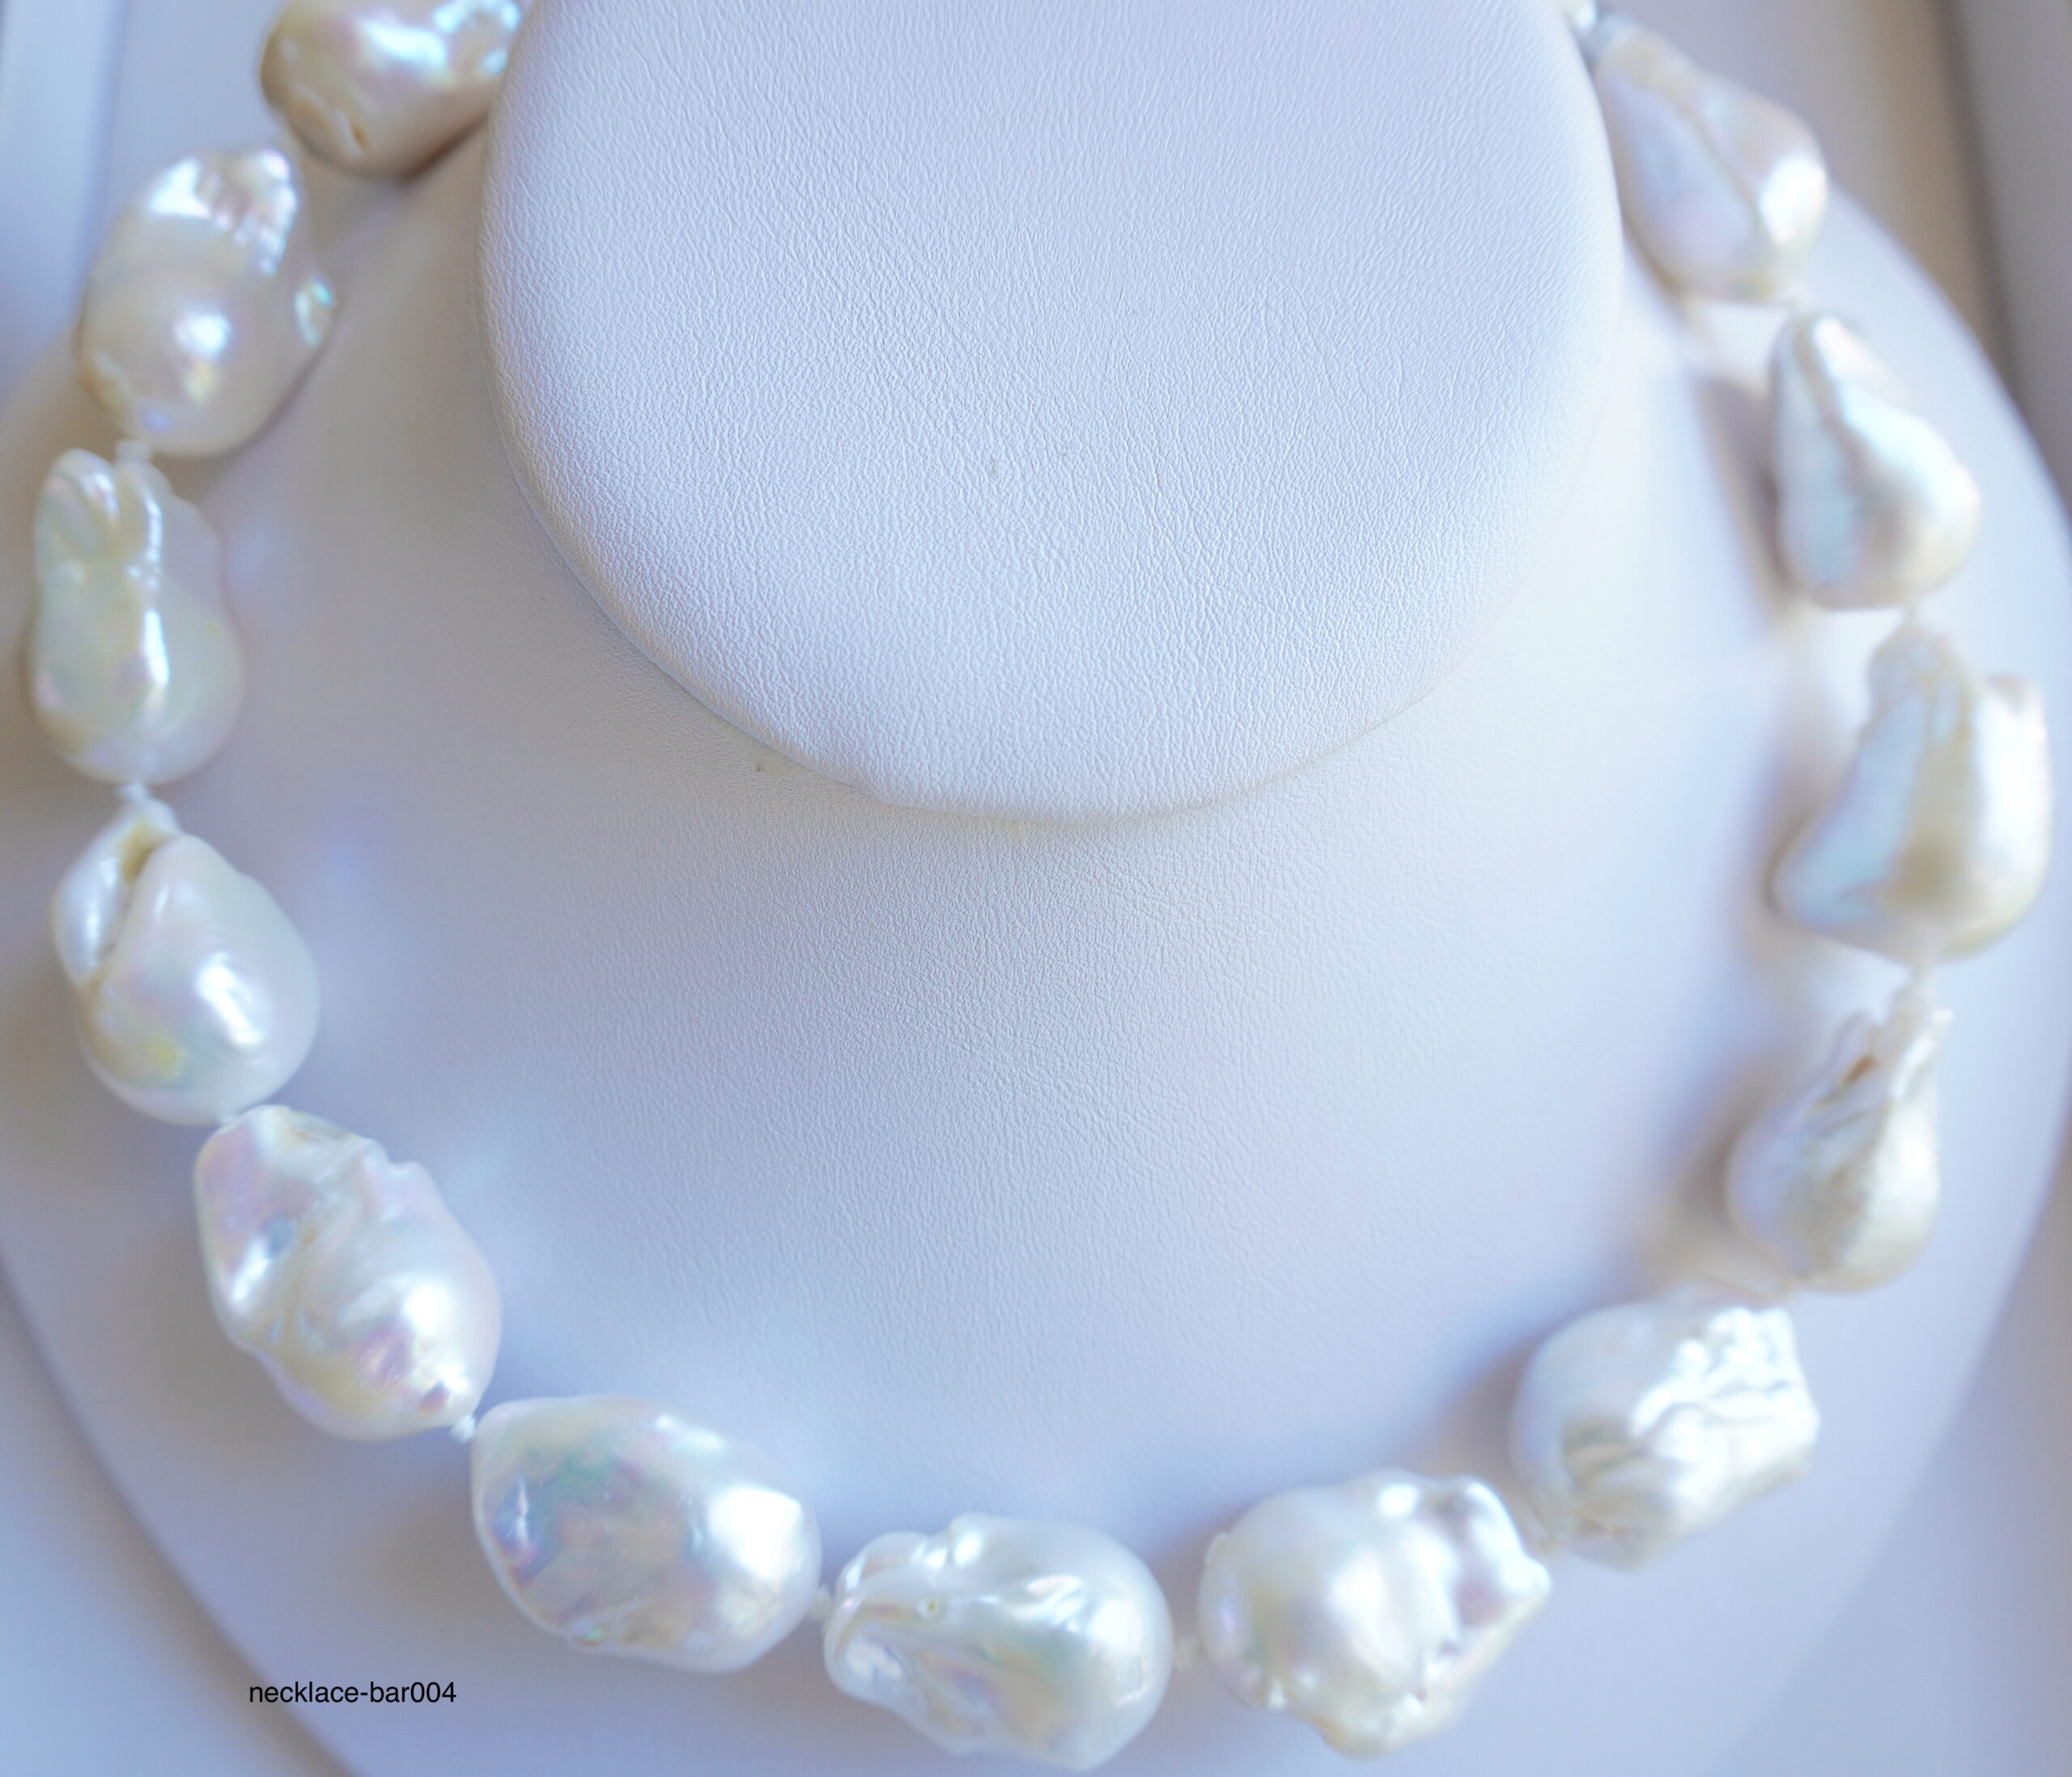 Baroque pearl necklace: beautiful huge baroque pearls making an ...